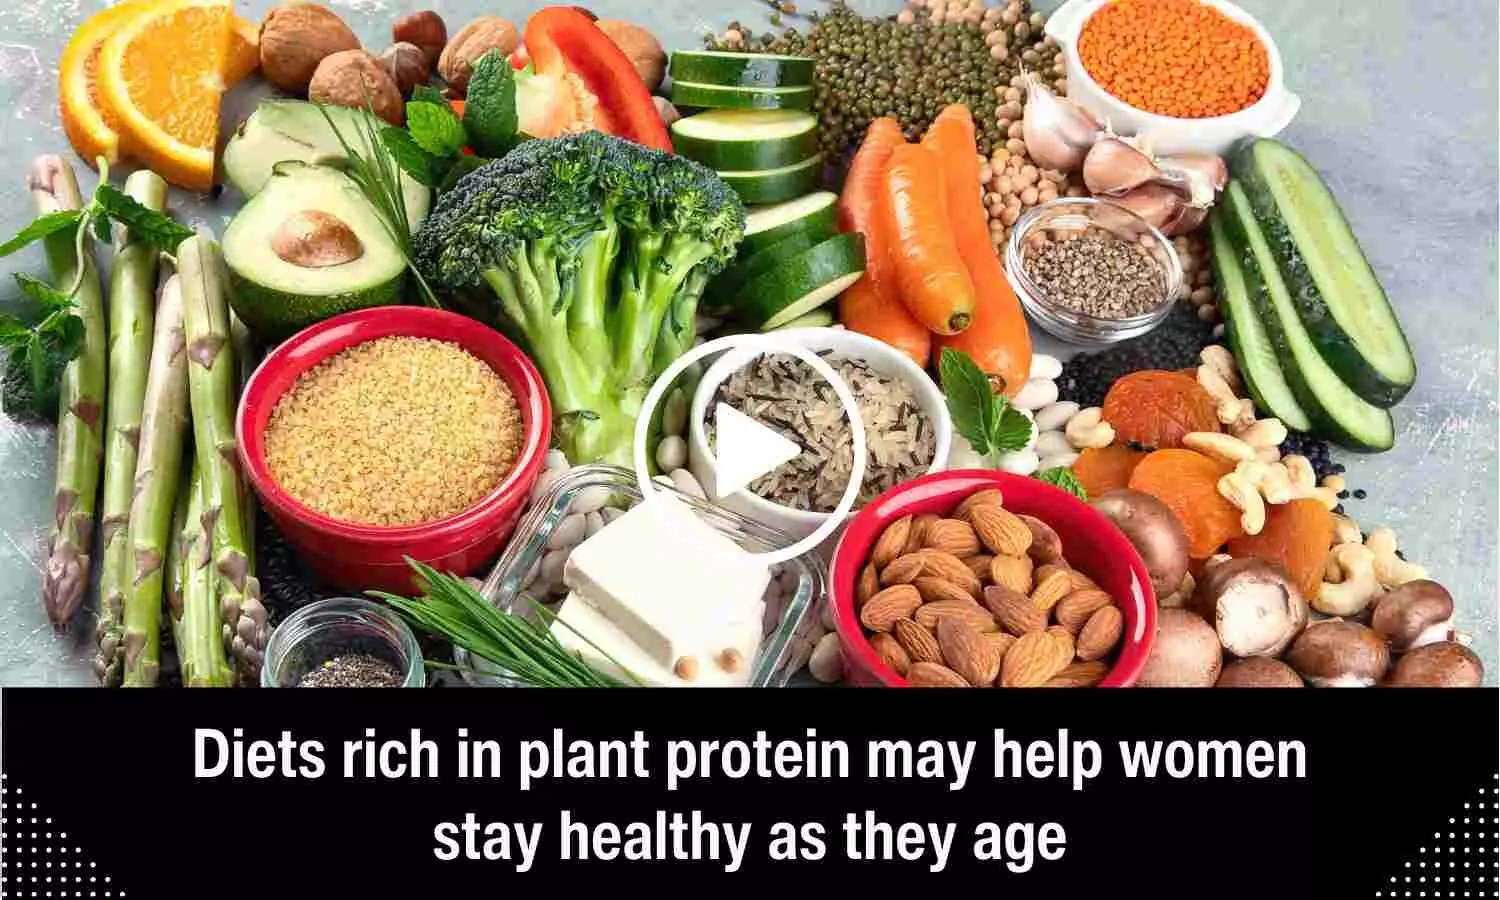 Diets rich in plant protein may help women stay healthy as they age